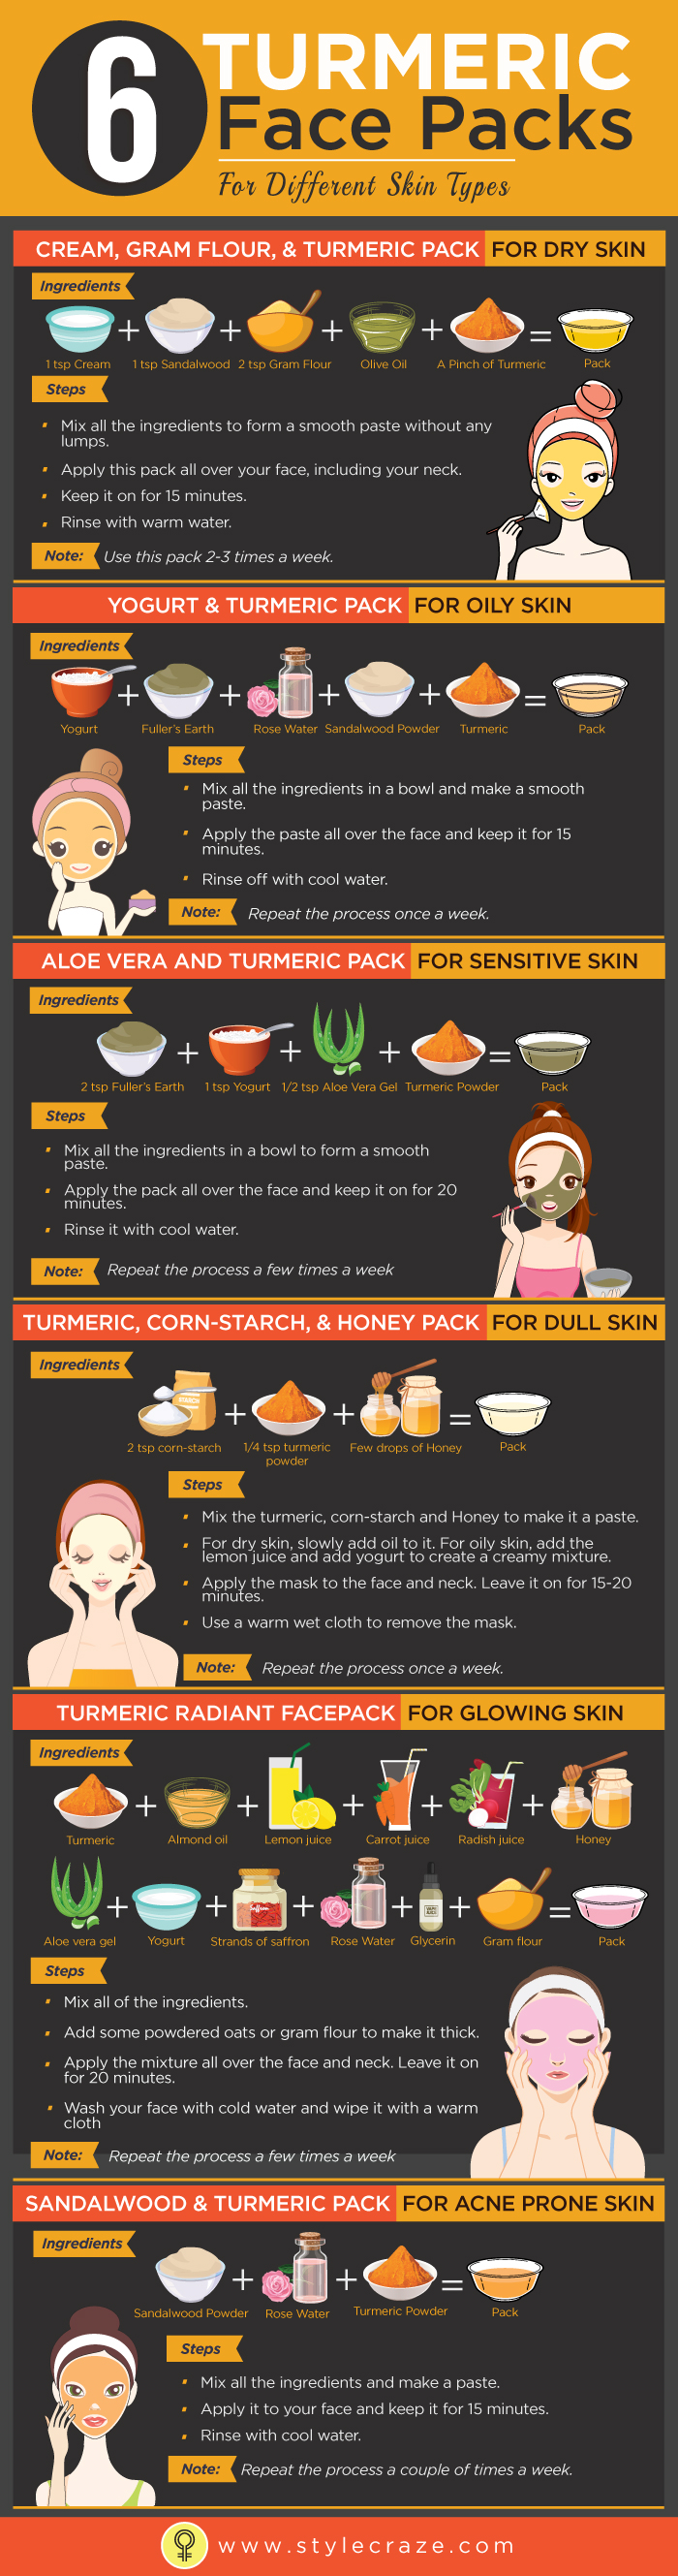 6 Turmeric Face Masks For All Skin Types Infographic